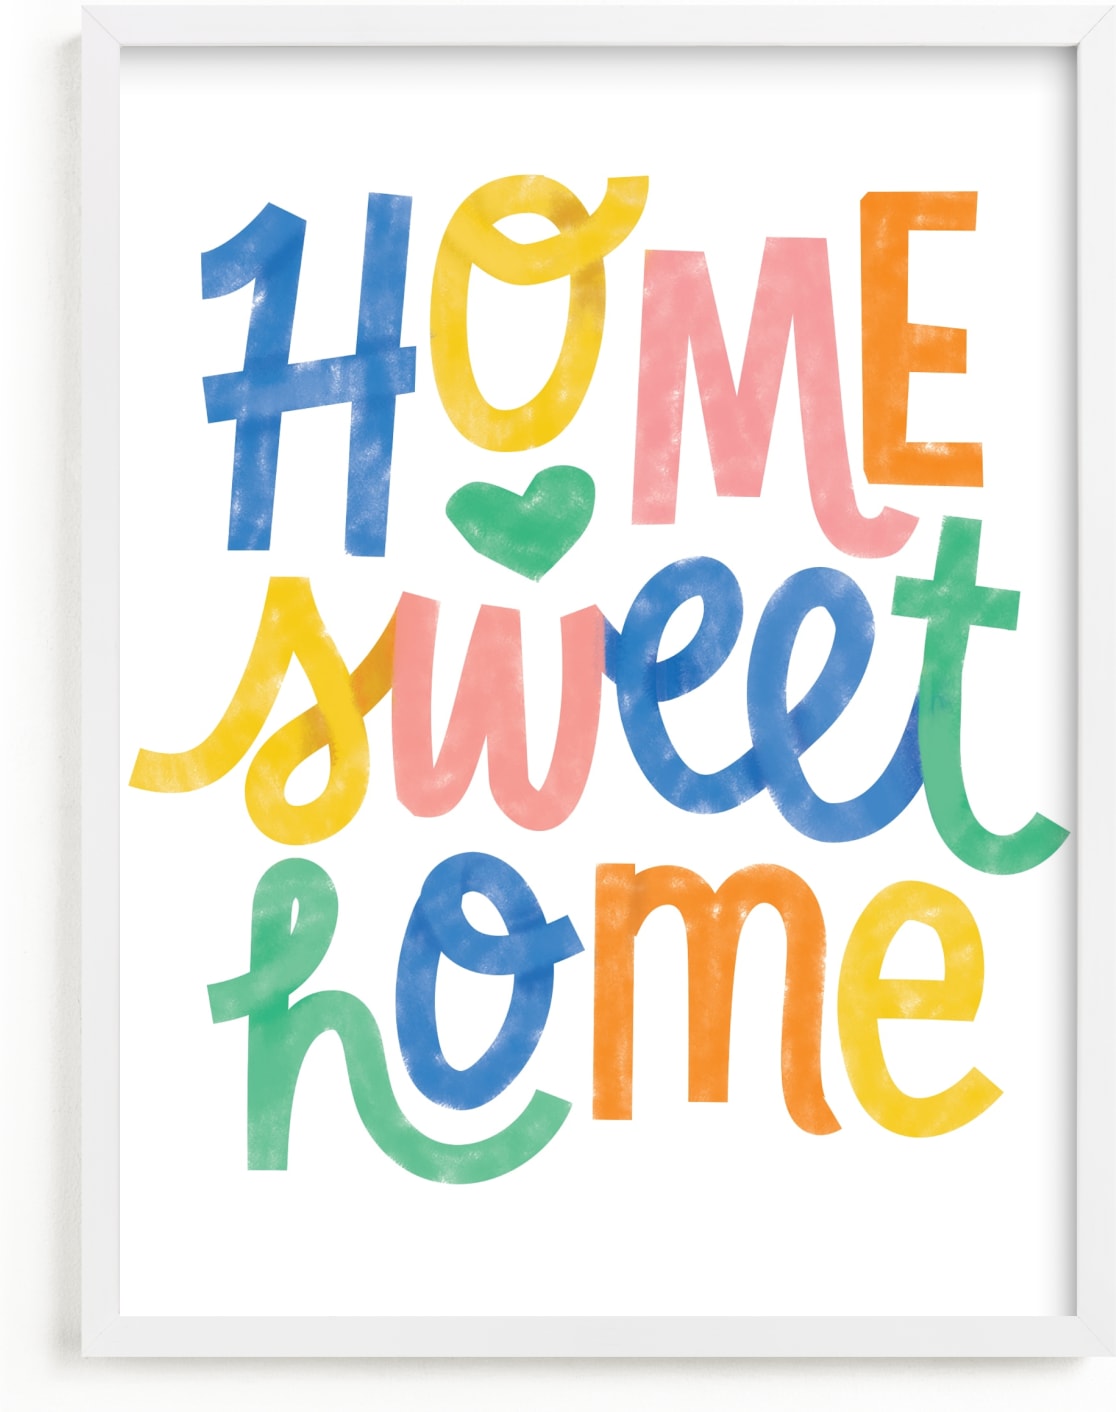 This is a colorful kids wall art by Ariel Rutland called Home Sweet Home.